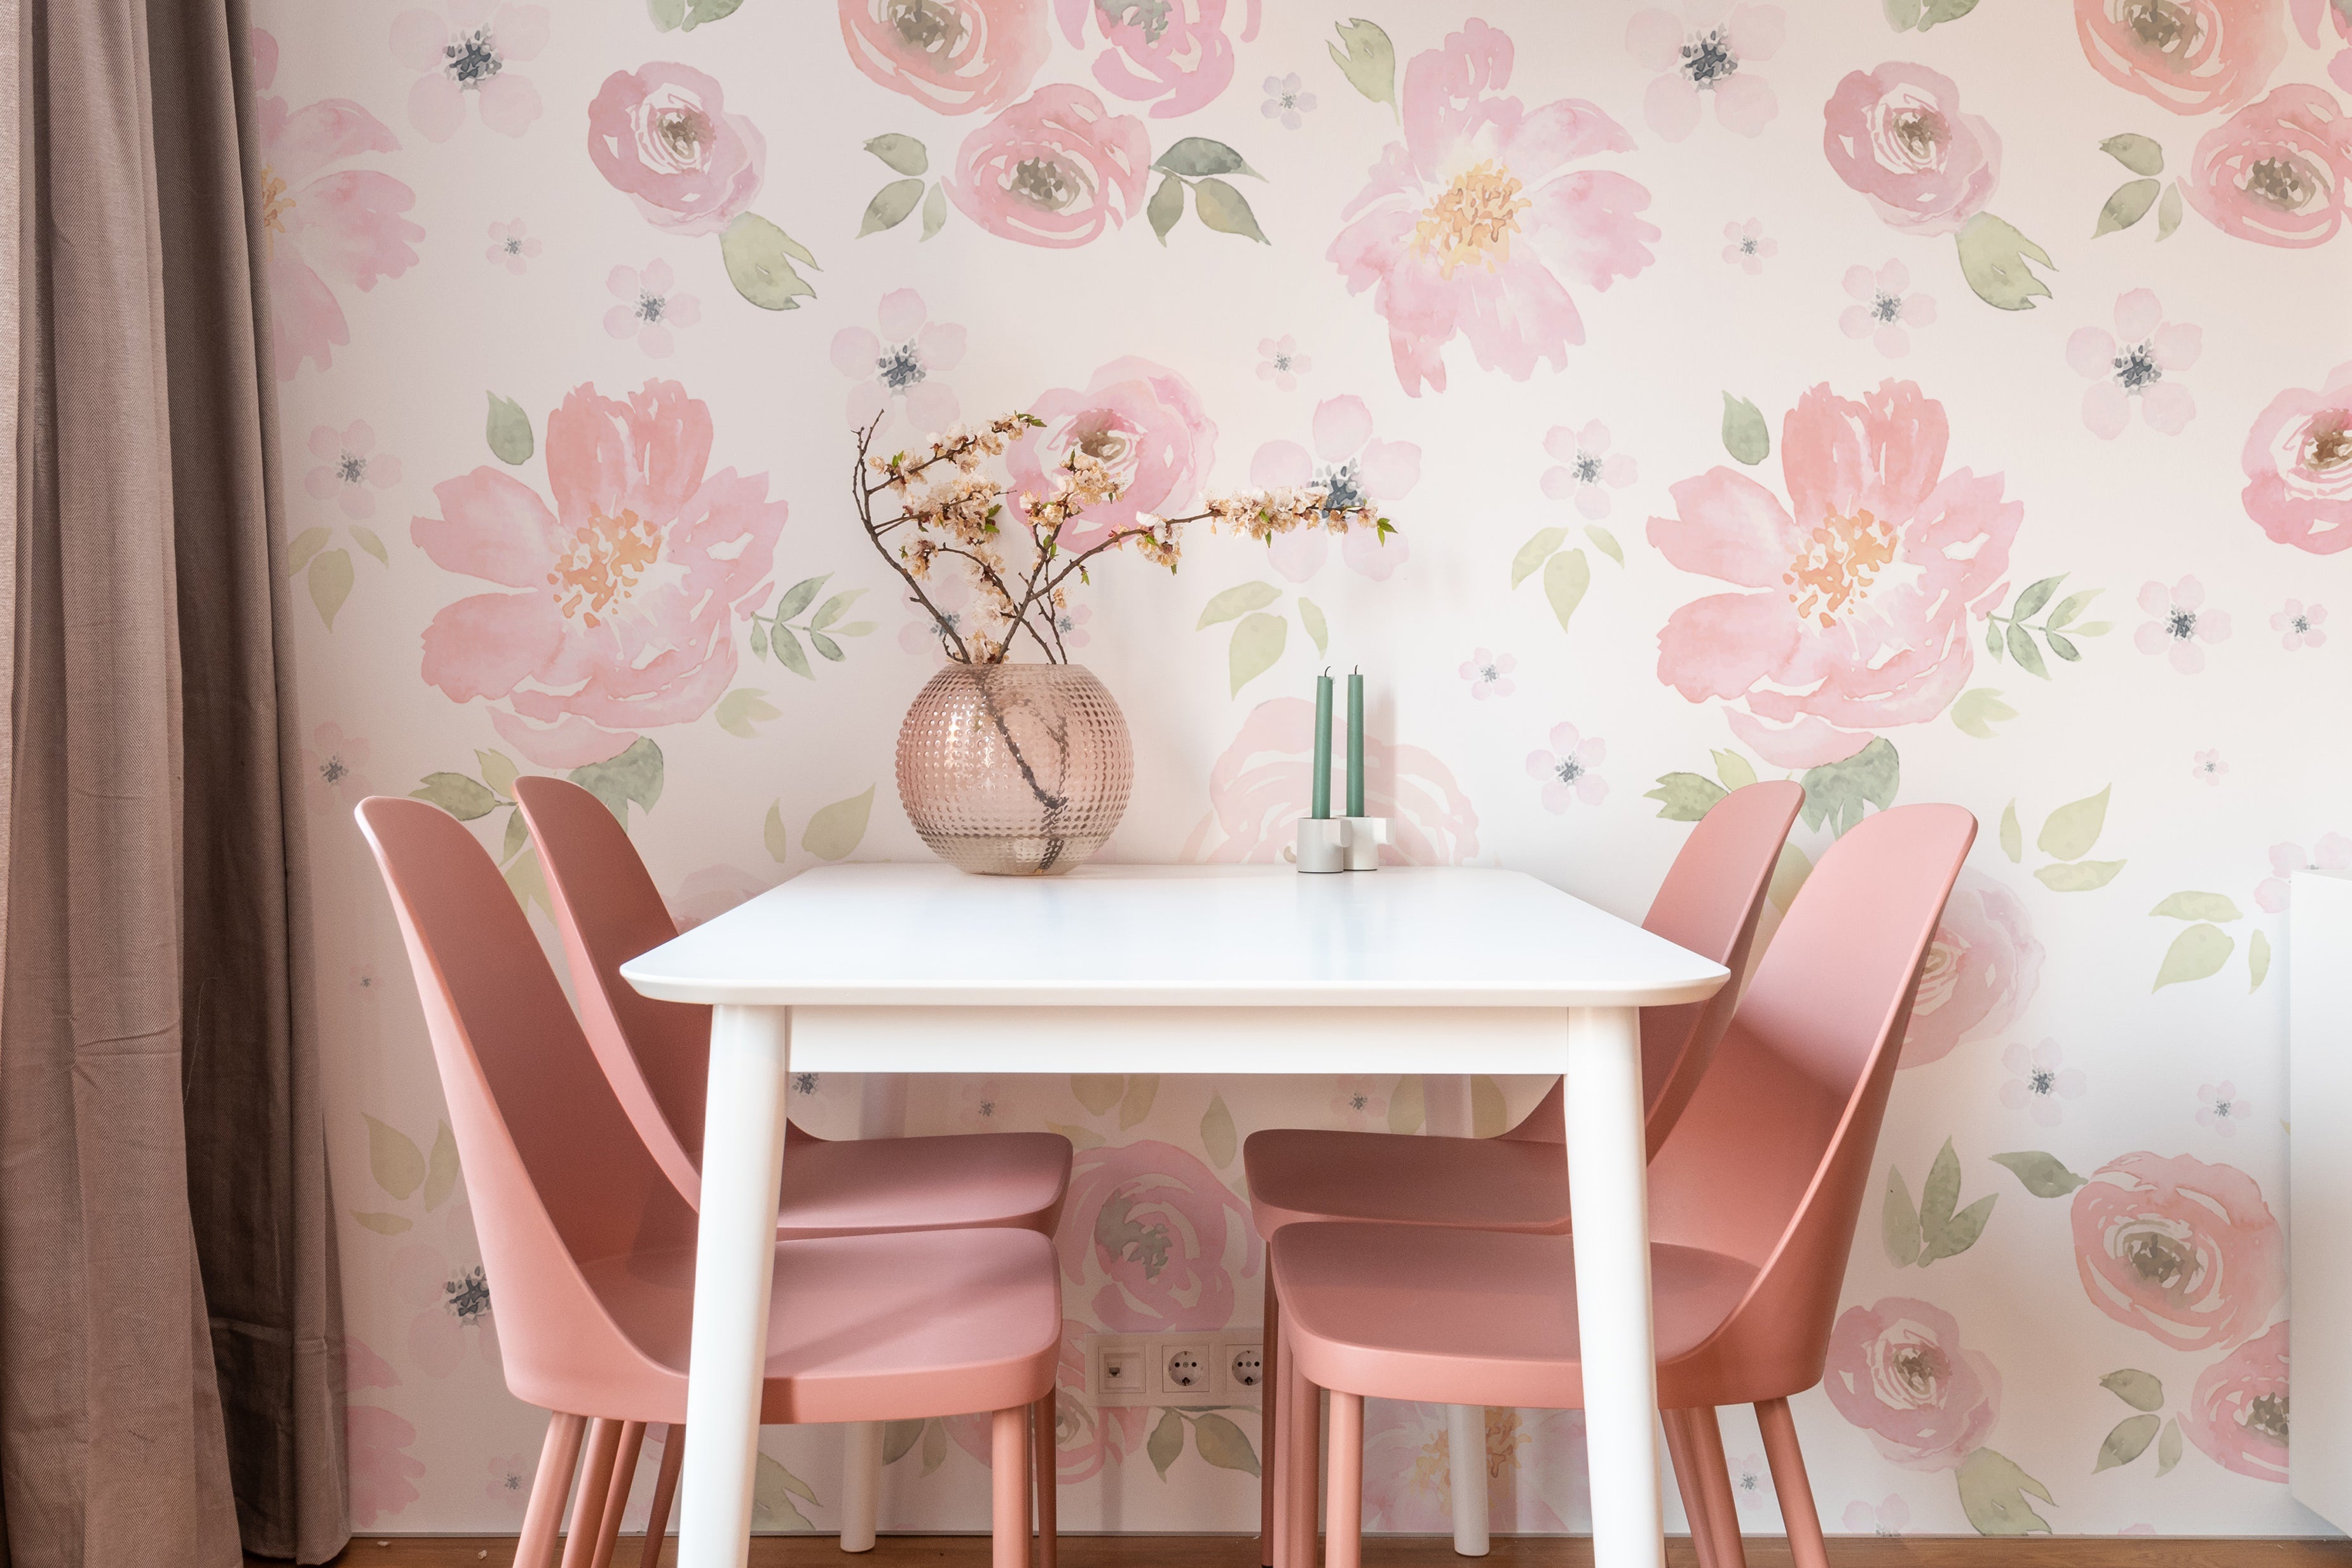 A charming dining area featuring the Gentle Blossom Wallpaper - 75" as a stunning backdrop. The wallpaper displays a pattern of pink and white flowers with soft green leaves, perfectly harmonizing with the pink chairs and white dining table, creating an inviting and elegant space